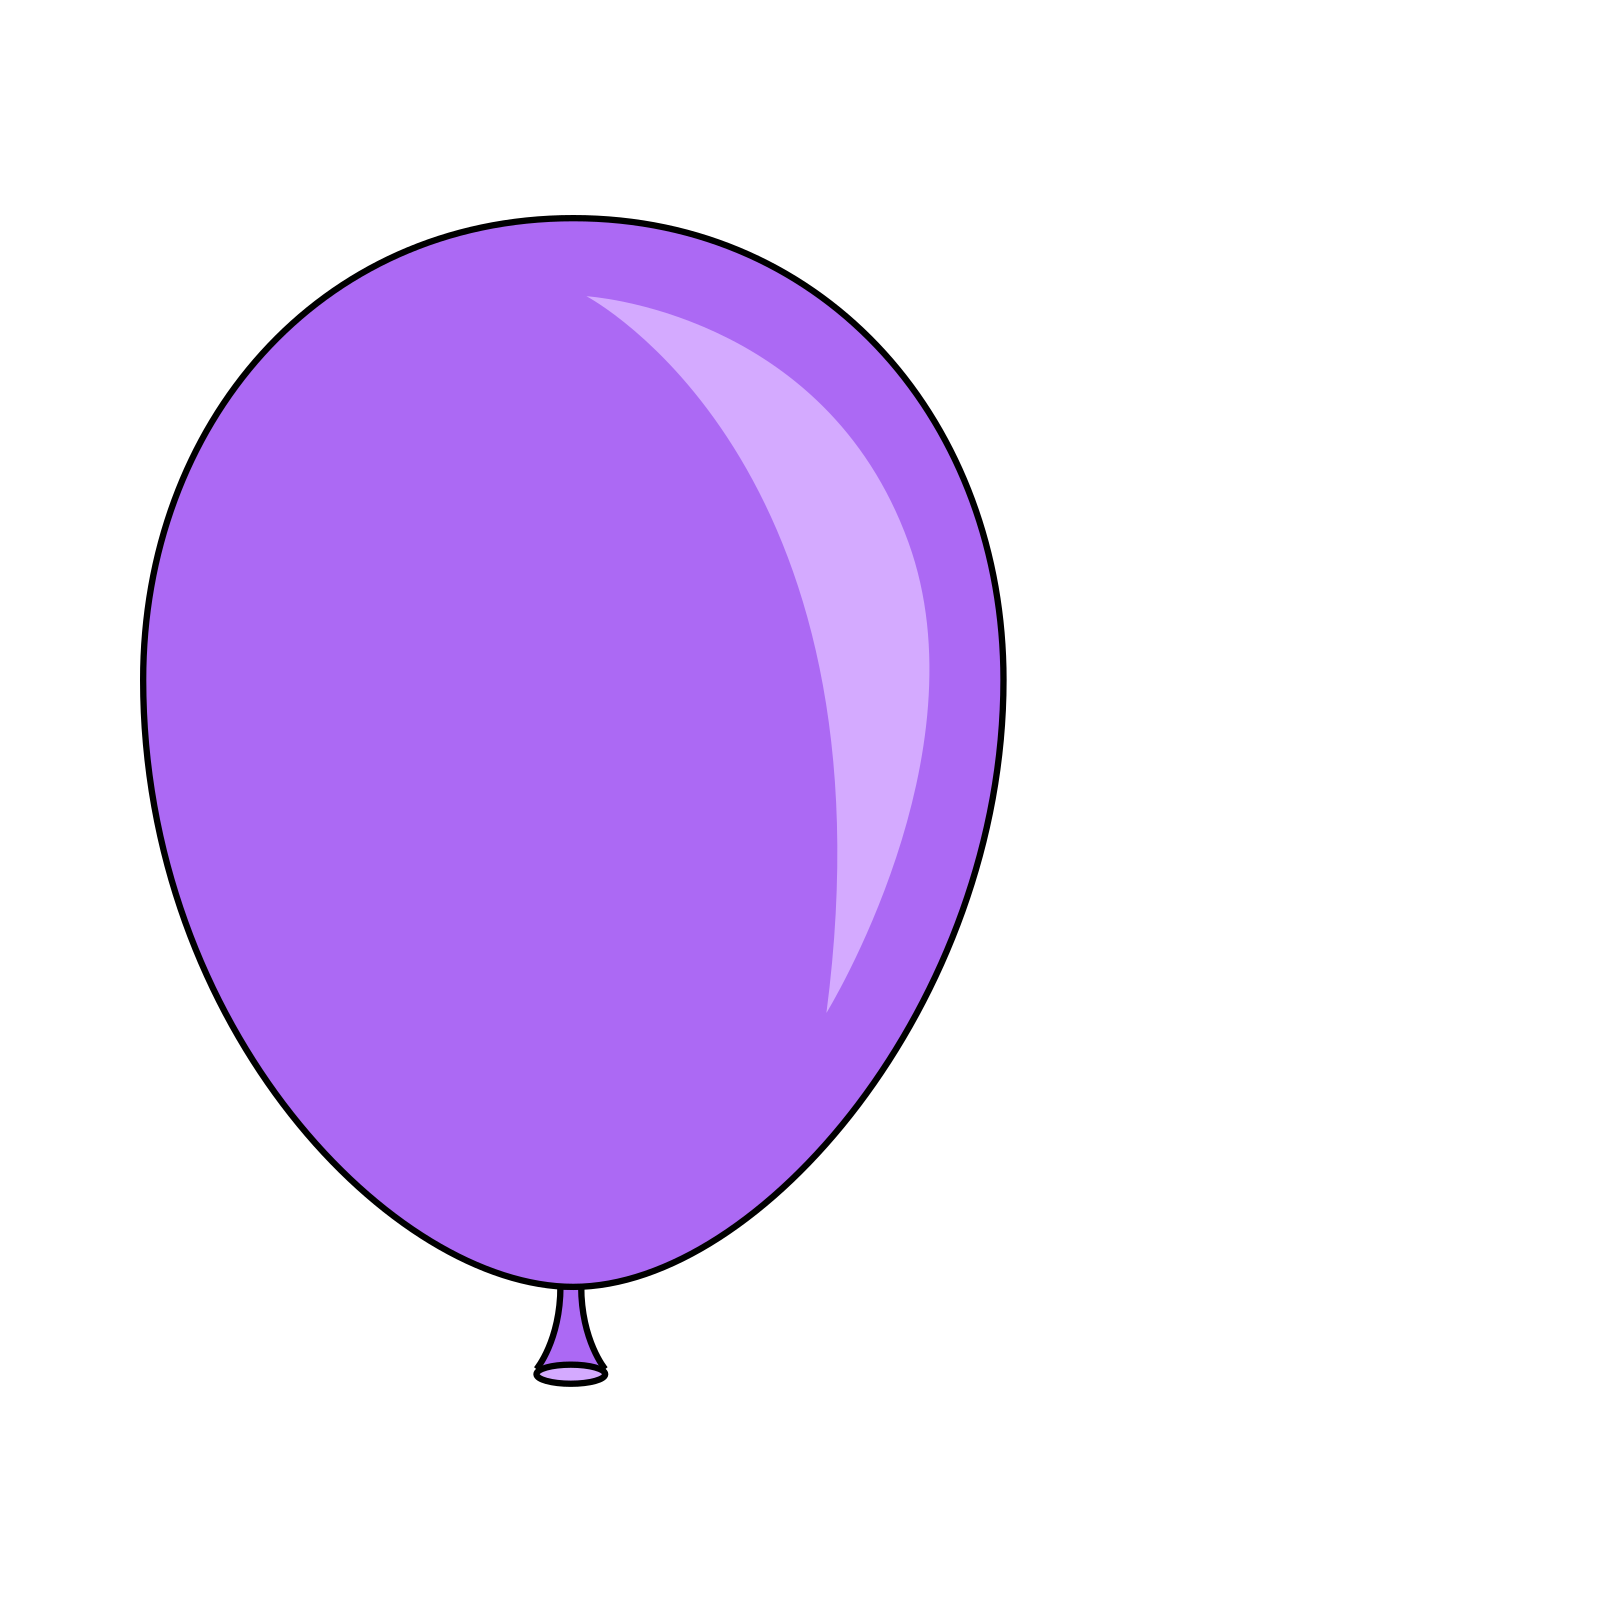 Purple Balloon PNG Image Background